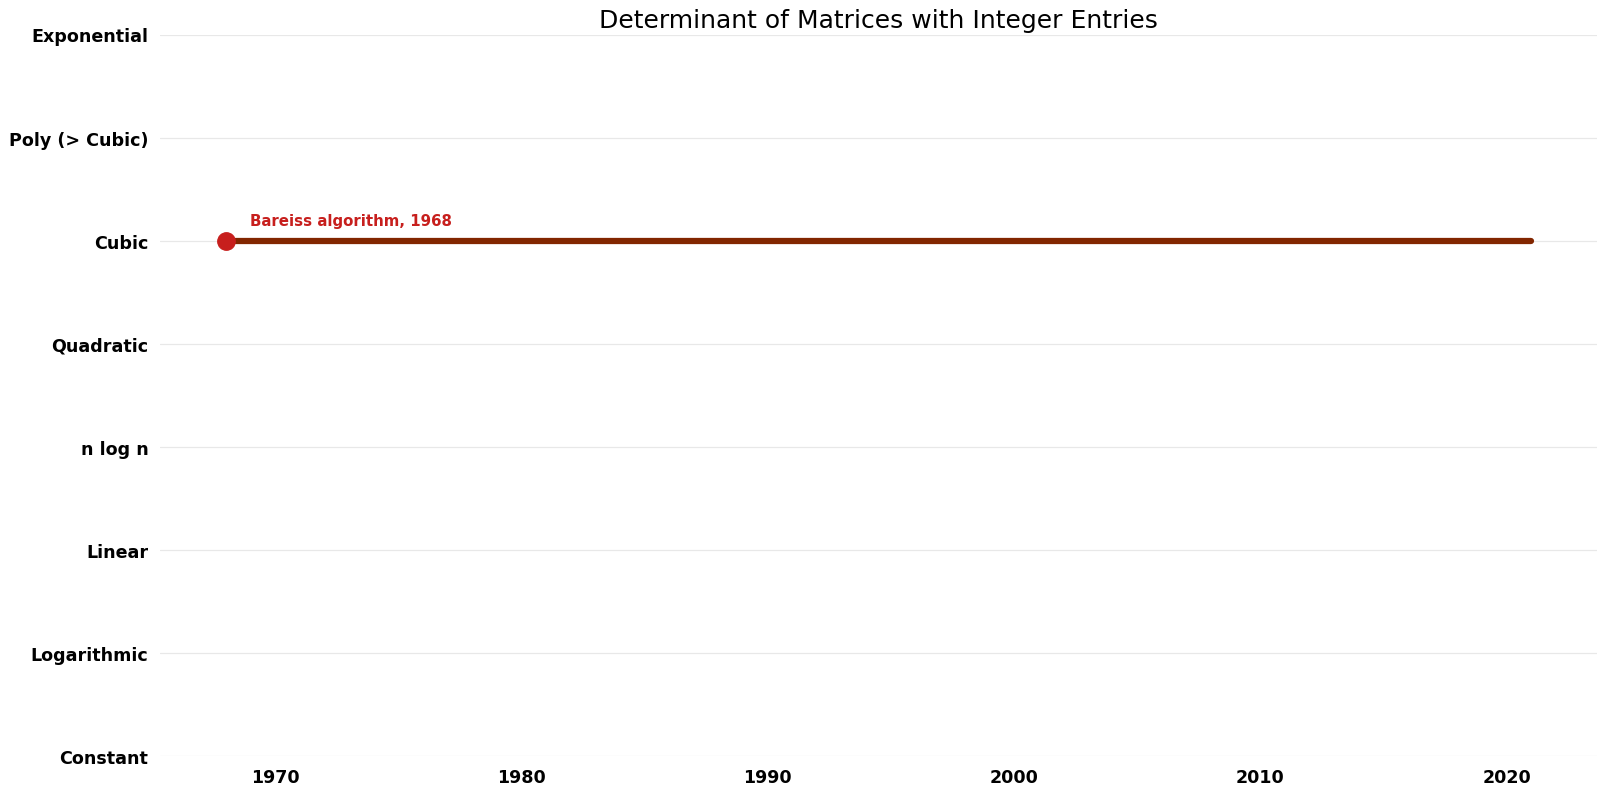 File:Determinant of Matrices with Integer Entries - Space.png